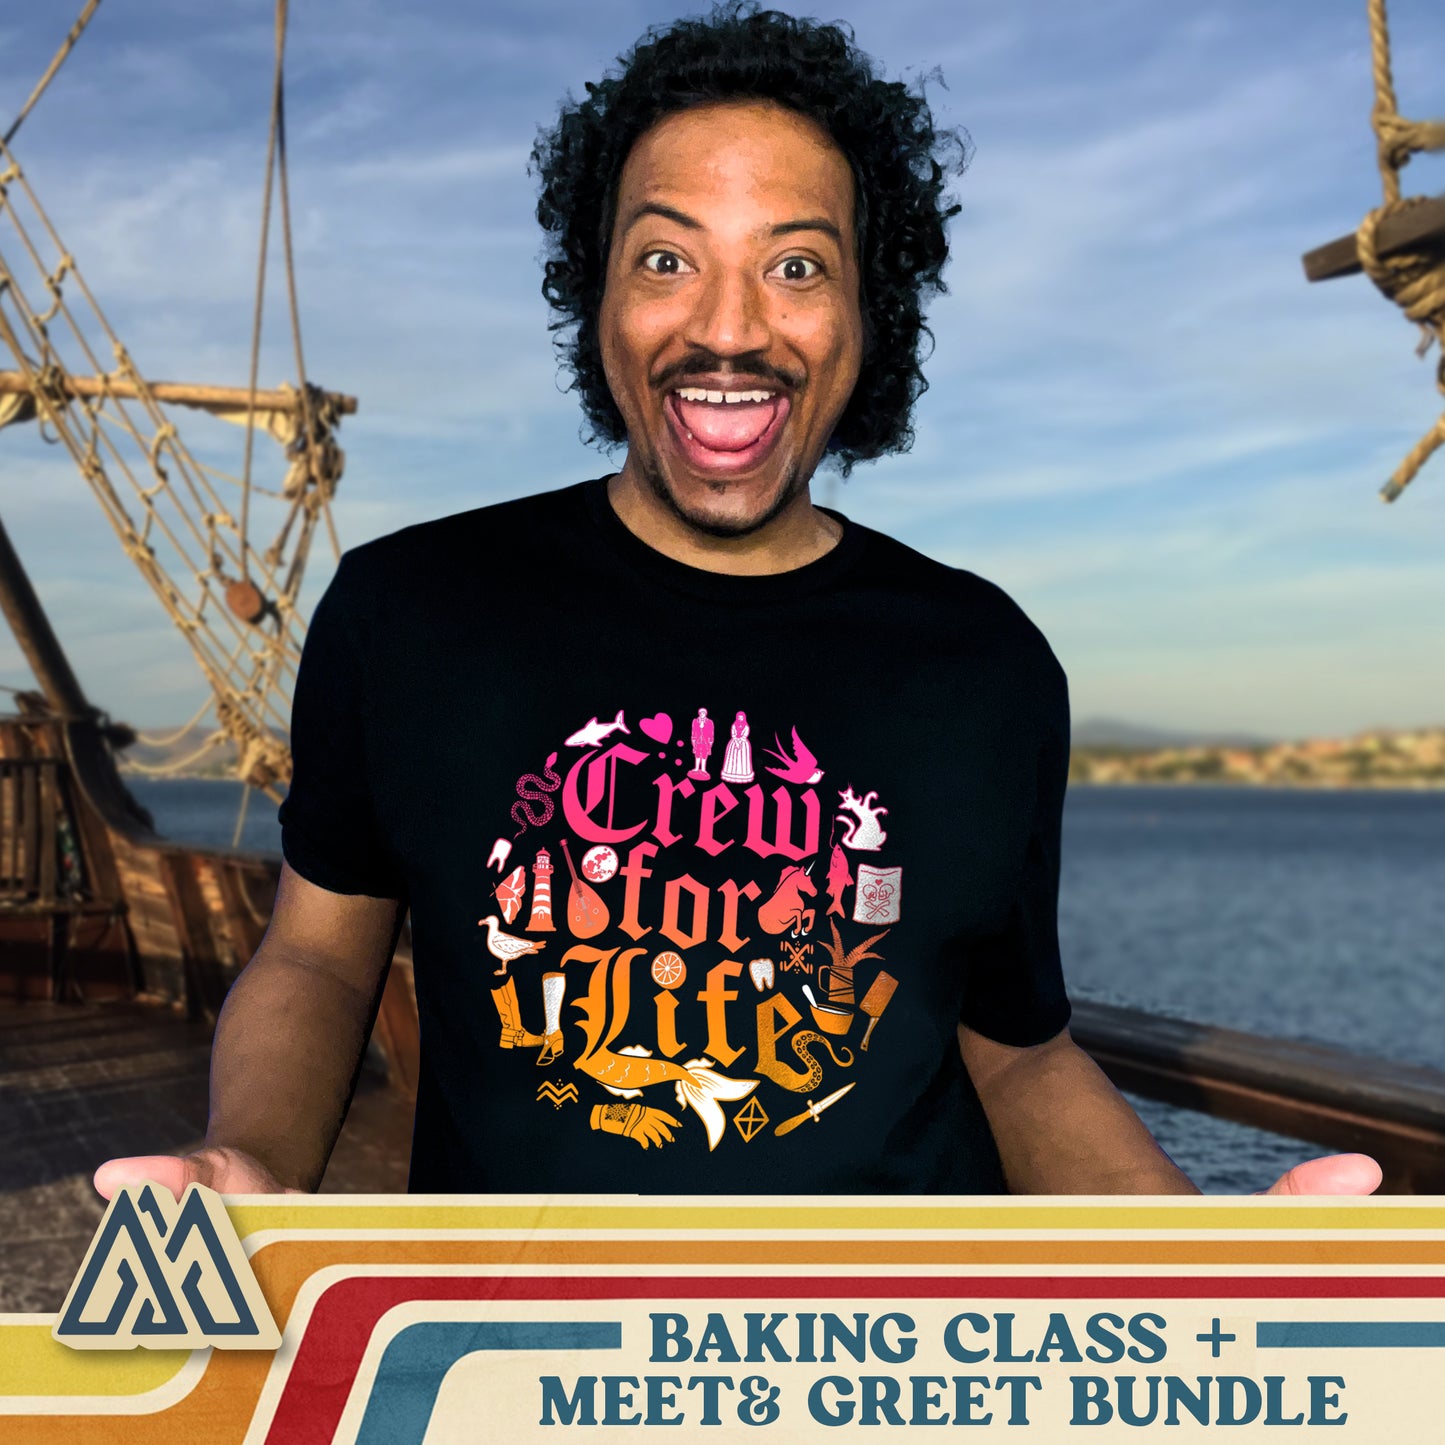 An image of actor Samba Schutte in a black T-shirt. On the front of the shirt is pink and orange old fashioned text that says "Crew for life." Around the text are drawings of flowers, gloves, and chef tools. Under Samba is the Momentus logo, with blue text saying "baking class + Meet & Greet Bundle." Behind him is a pirate ship on the open water, with land in the distance.